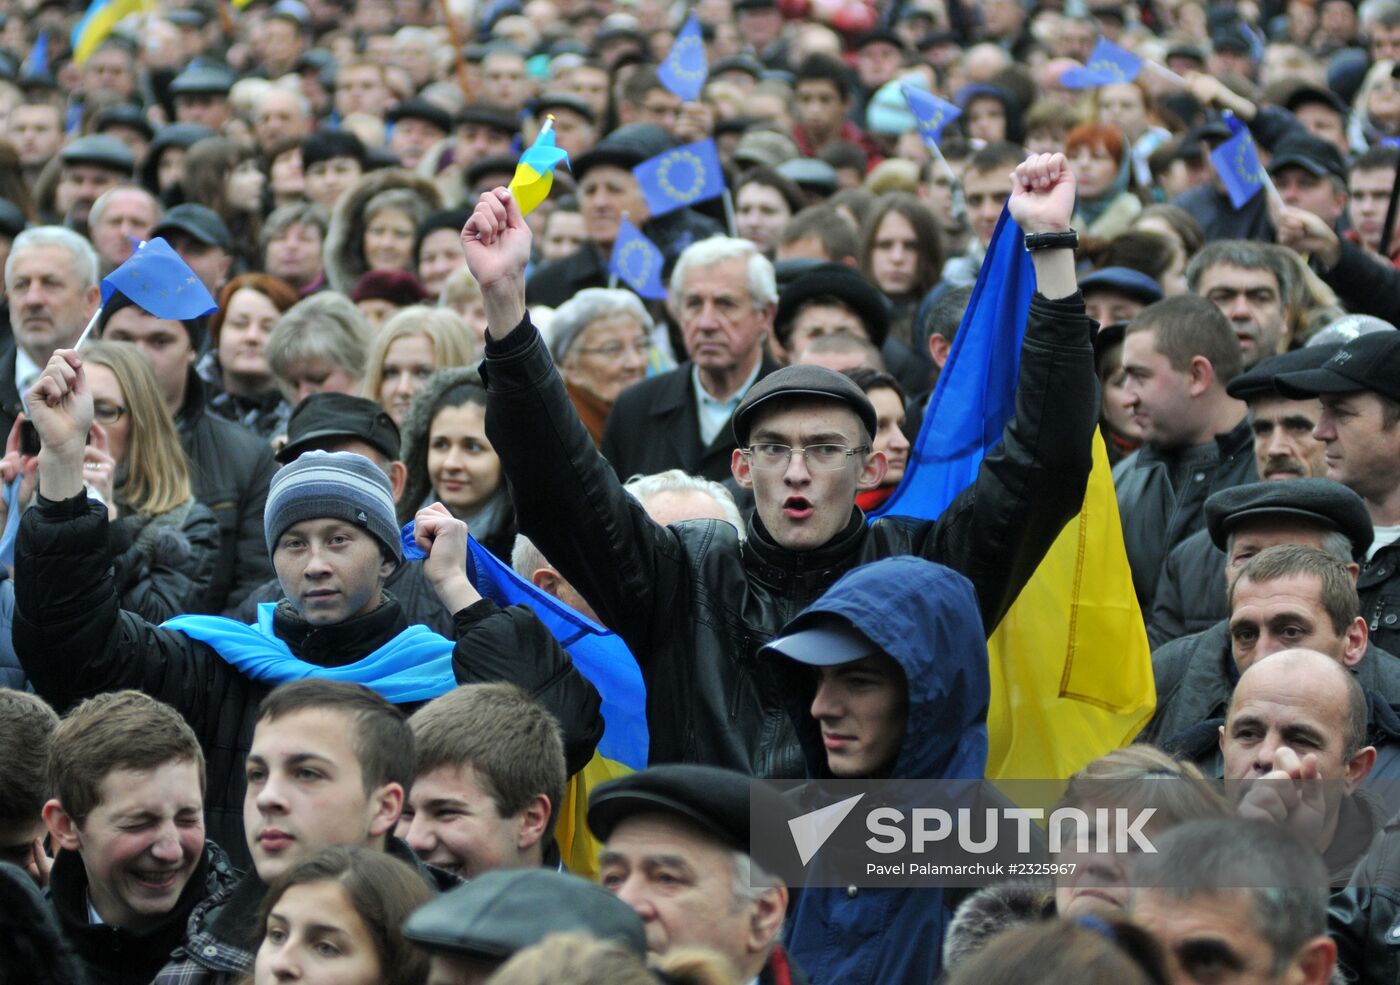 For a European Ukraine rally in Lvov